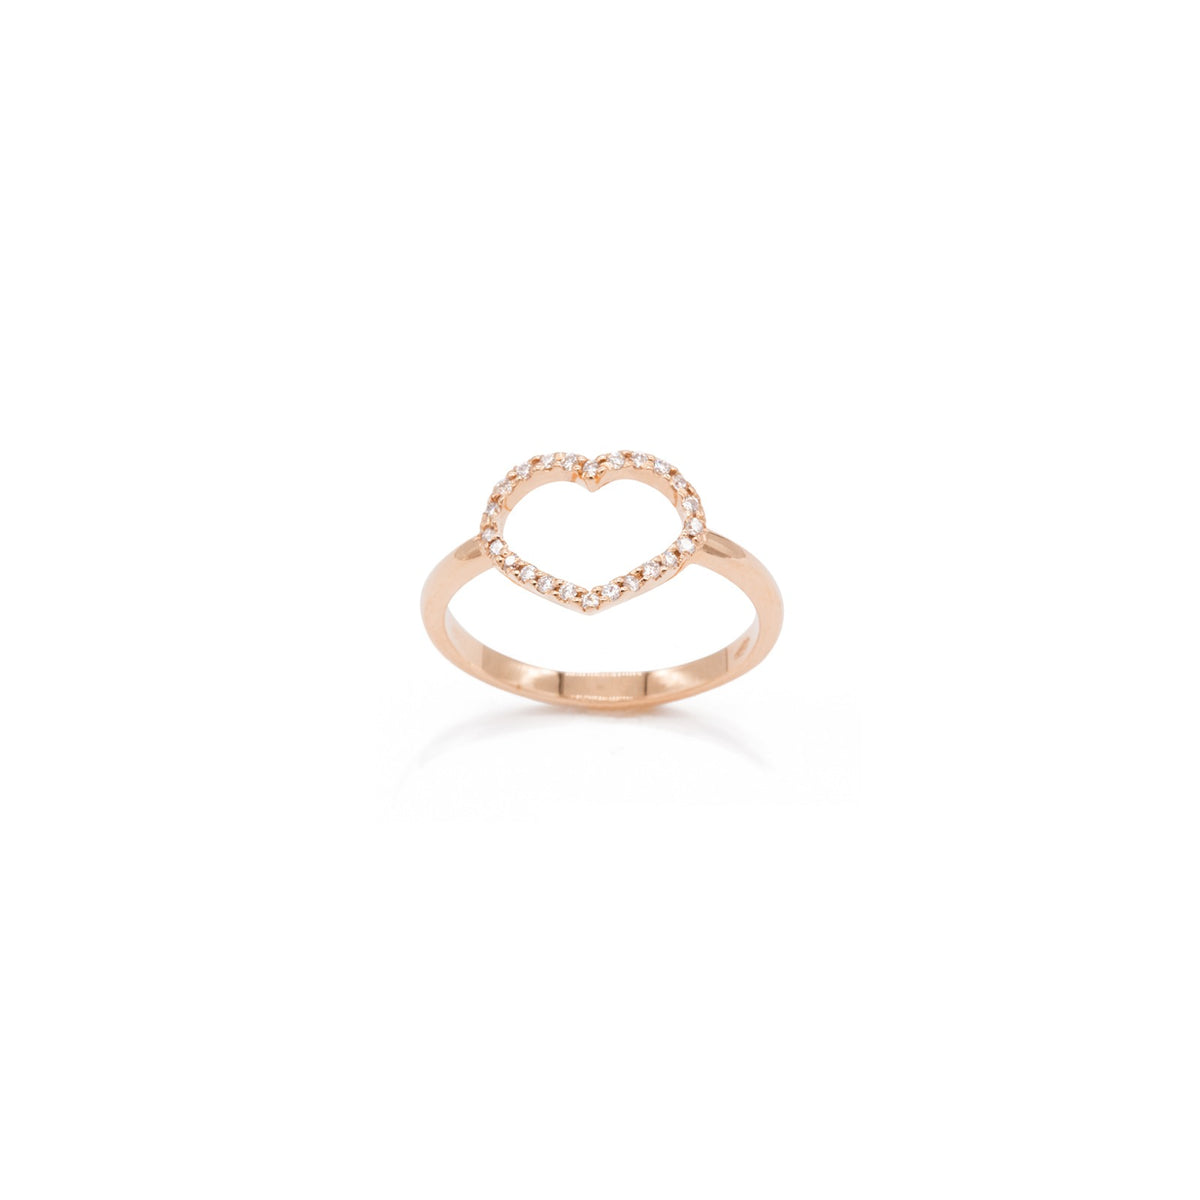 Heart shape ring in rose gold and diamonds